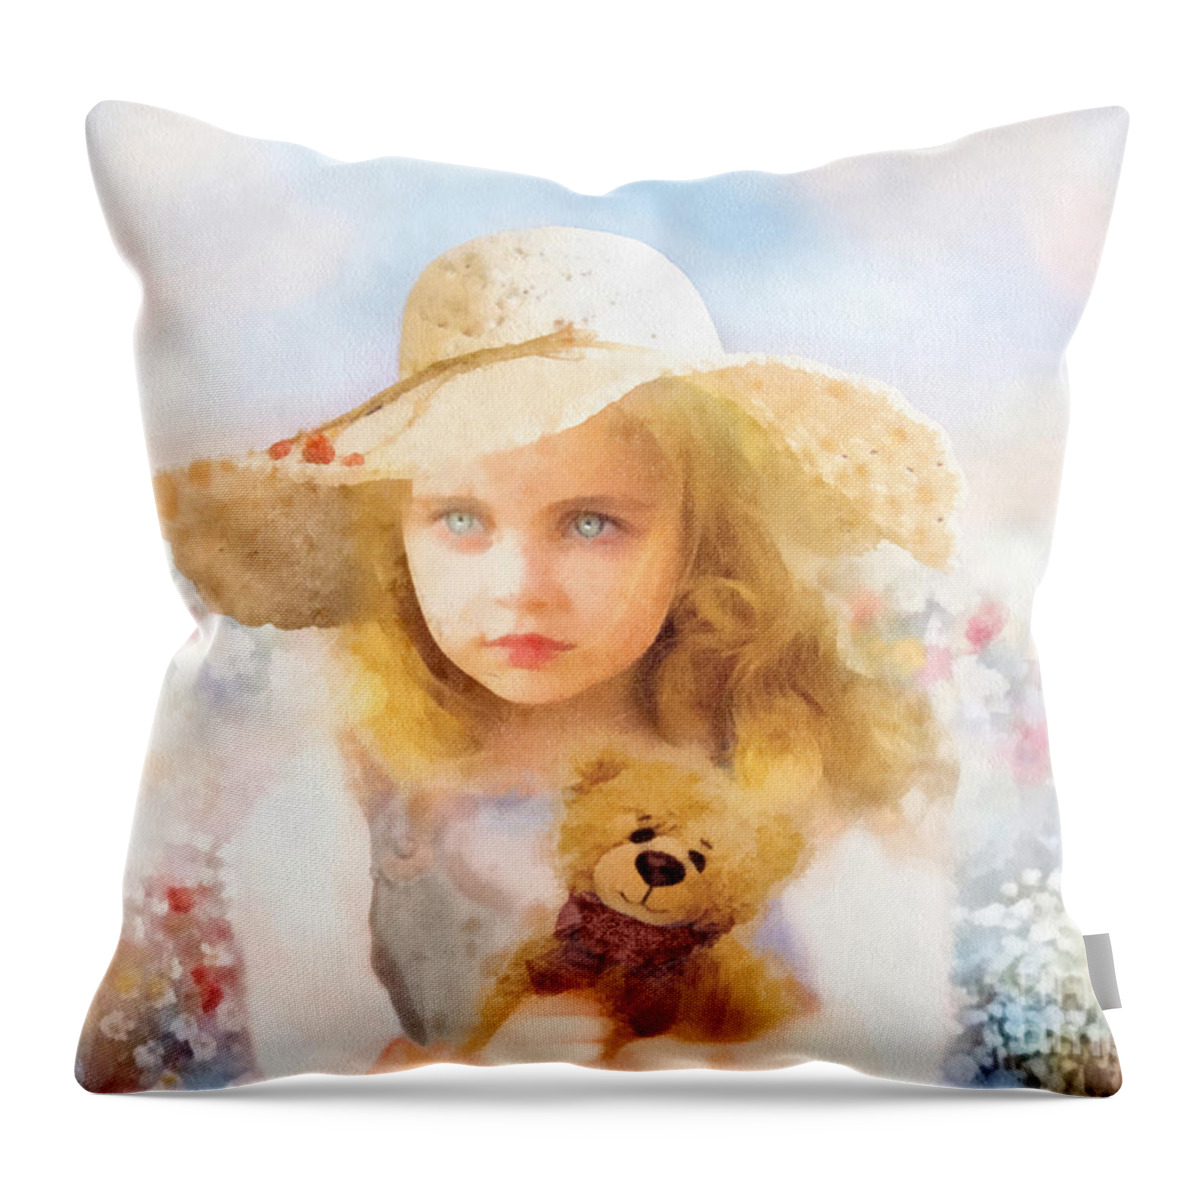 Tranquility Throw Pillow featuring the painting Tranquility by Mo T